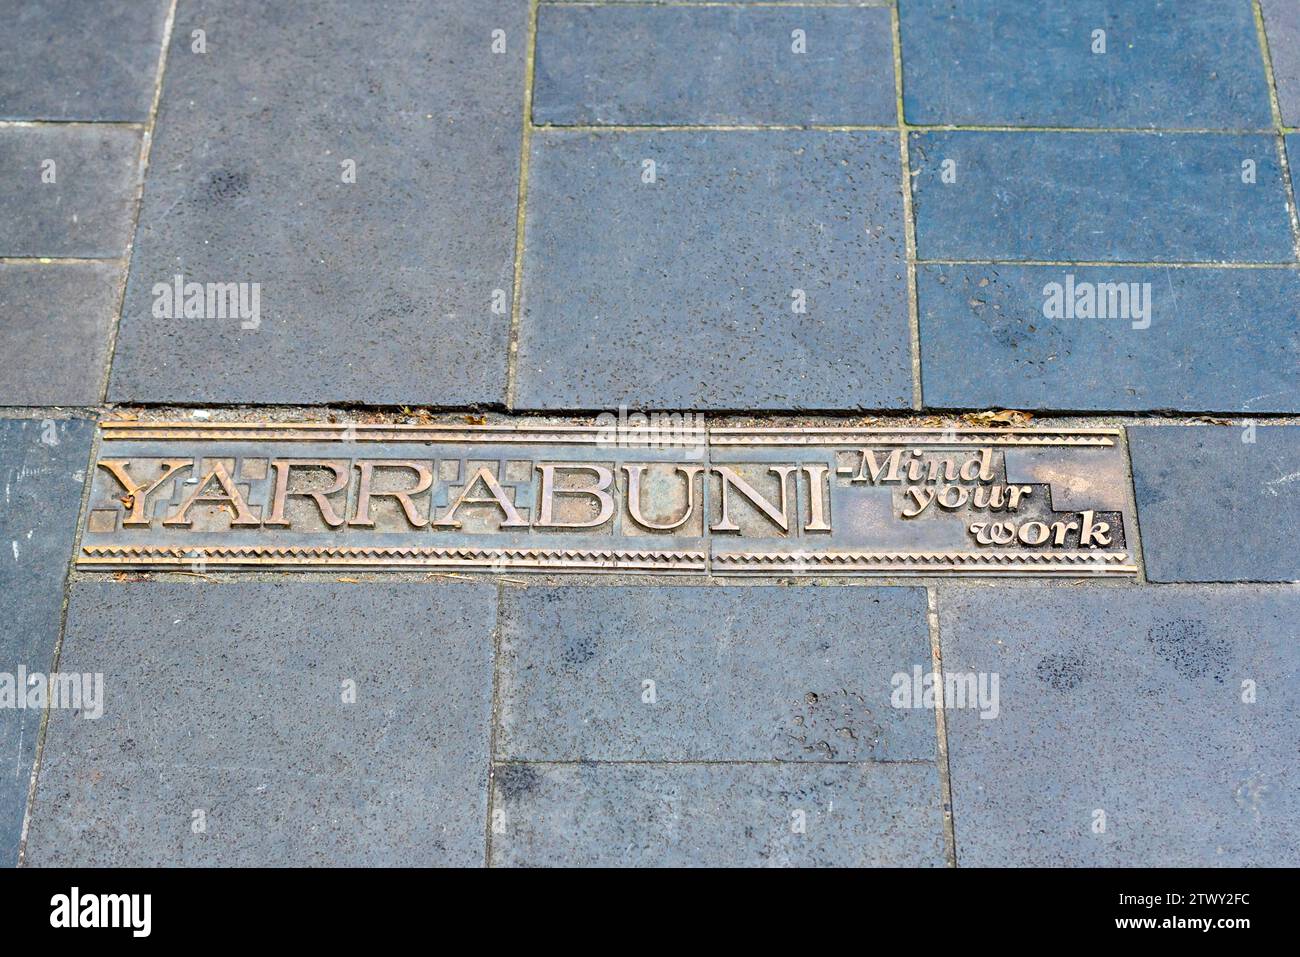 Aboriginal language words on brass plates embedded in the pavement of Martin Place in Sydney, Australia Stock Photo